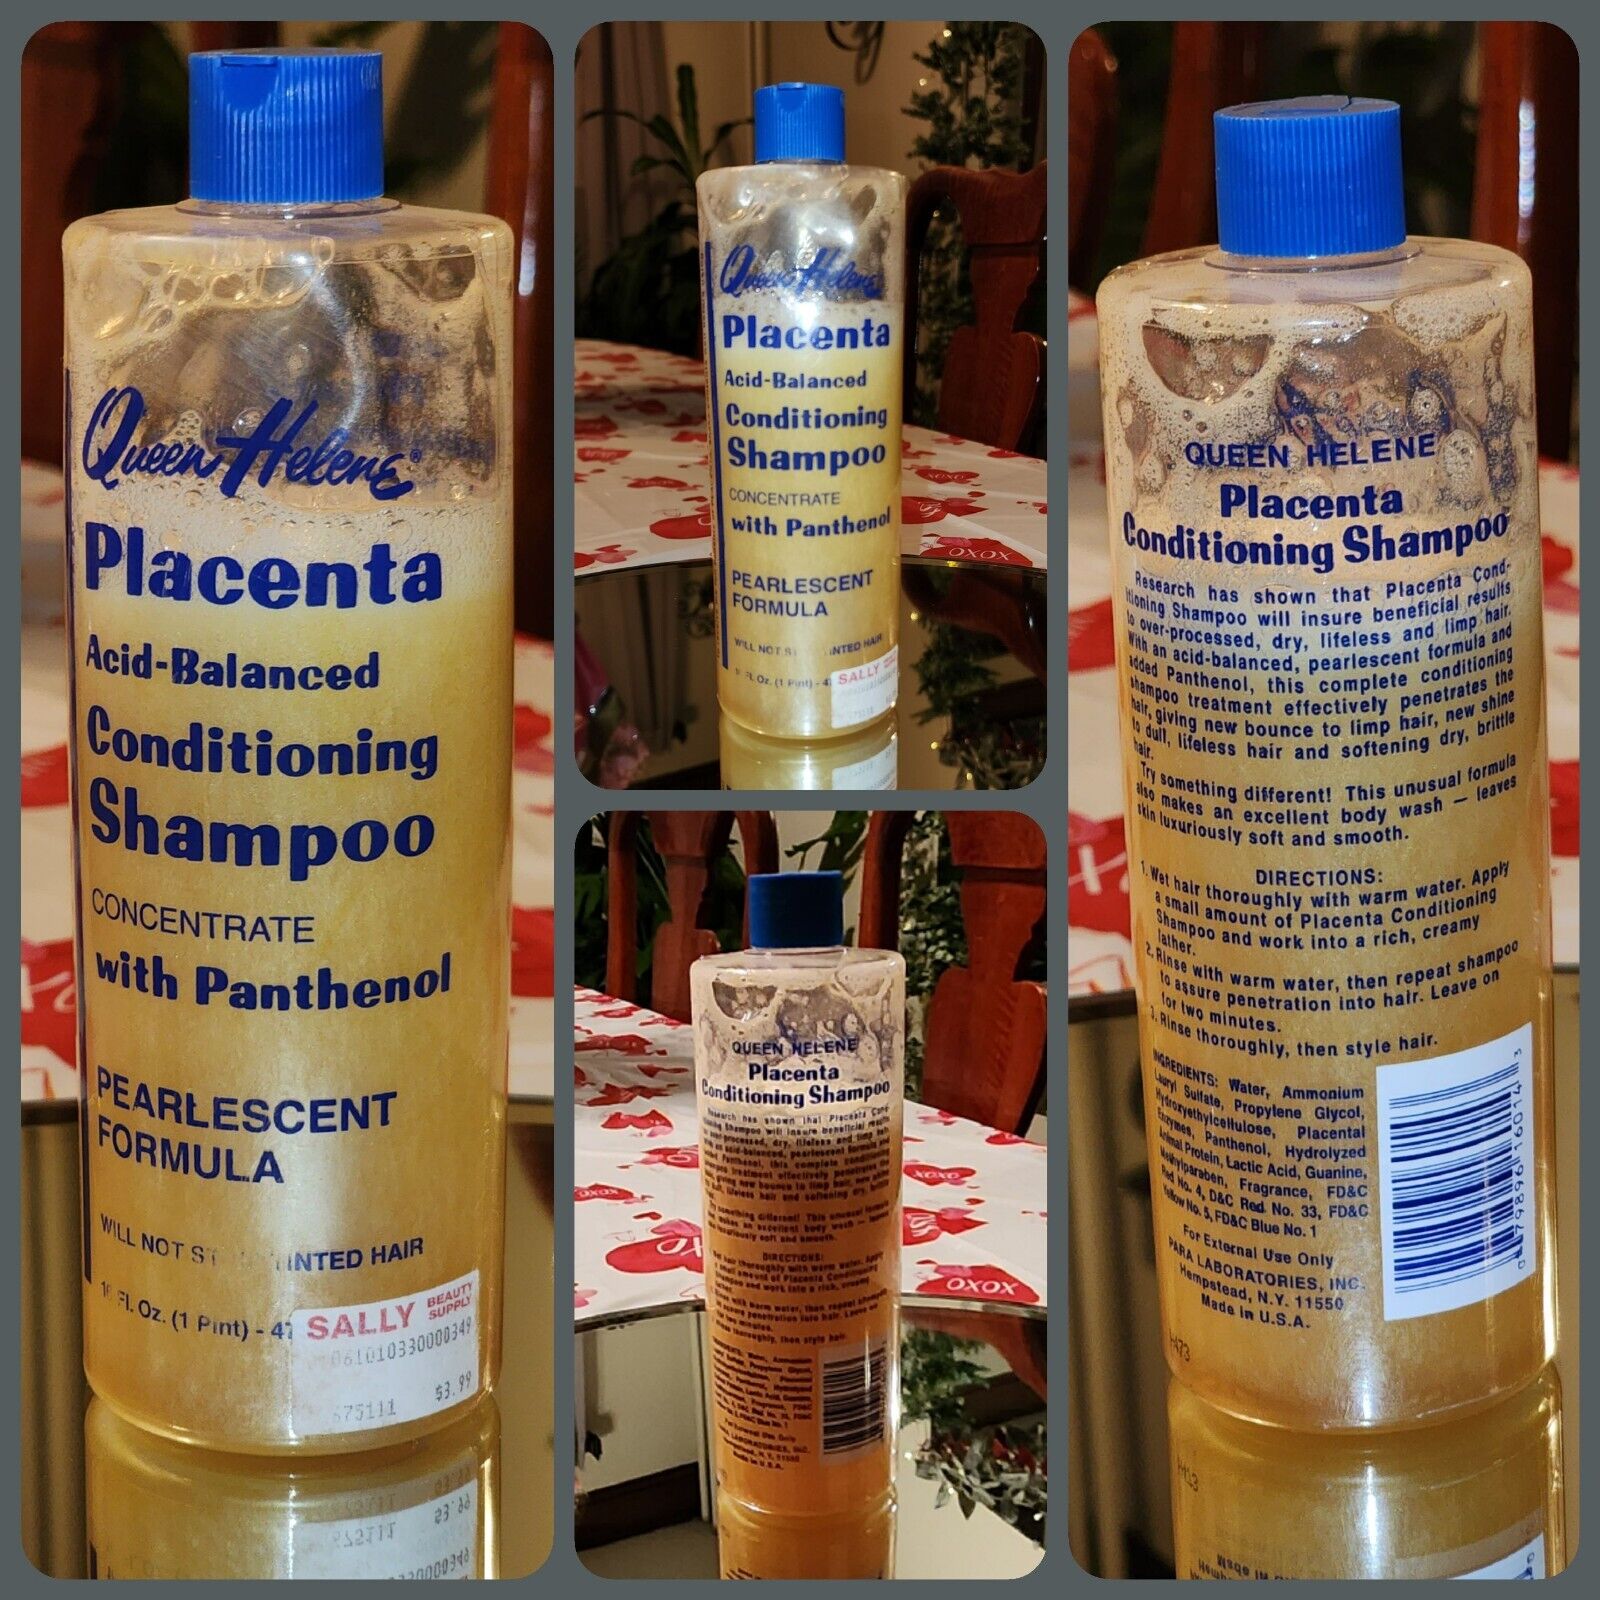 Rare 1980s Vintage Queen Helene PLACENTA Conditioning Shampoo Concentrate 16 oz